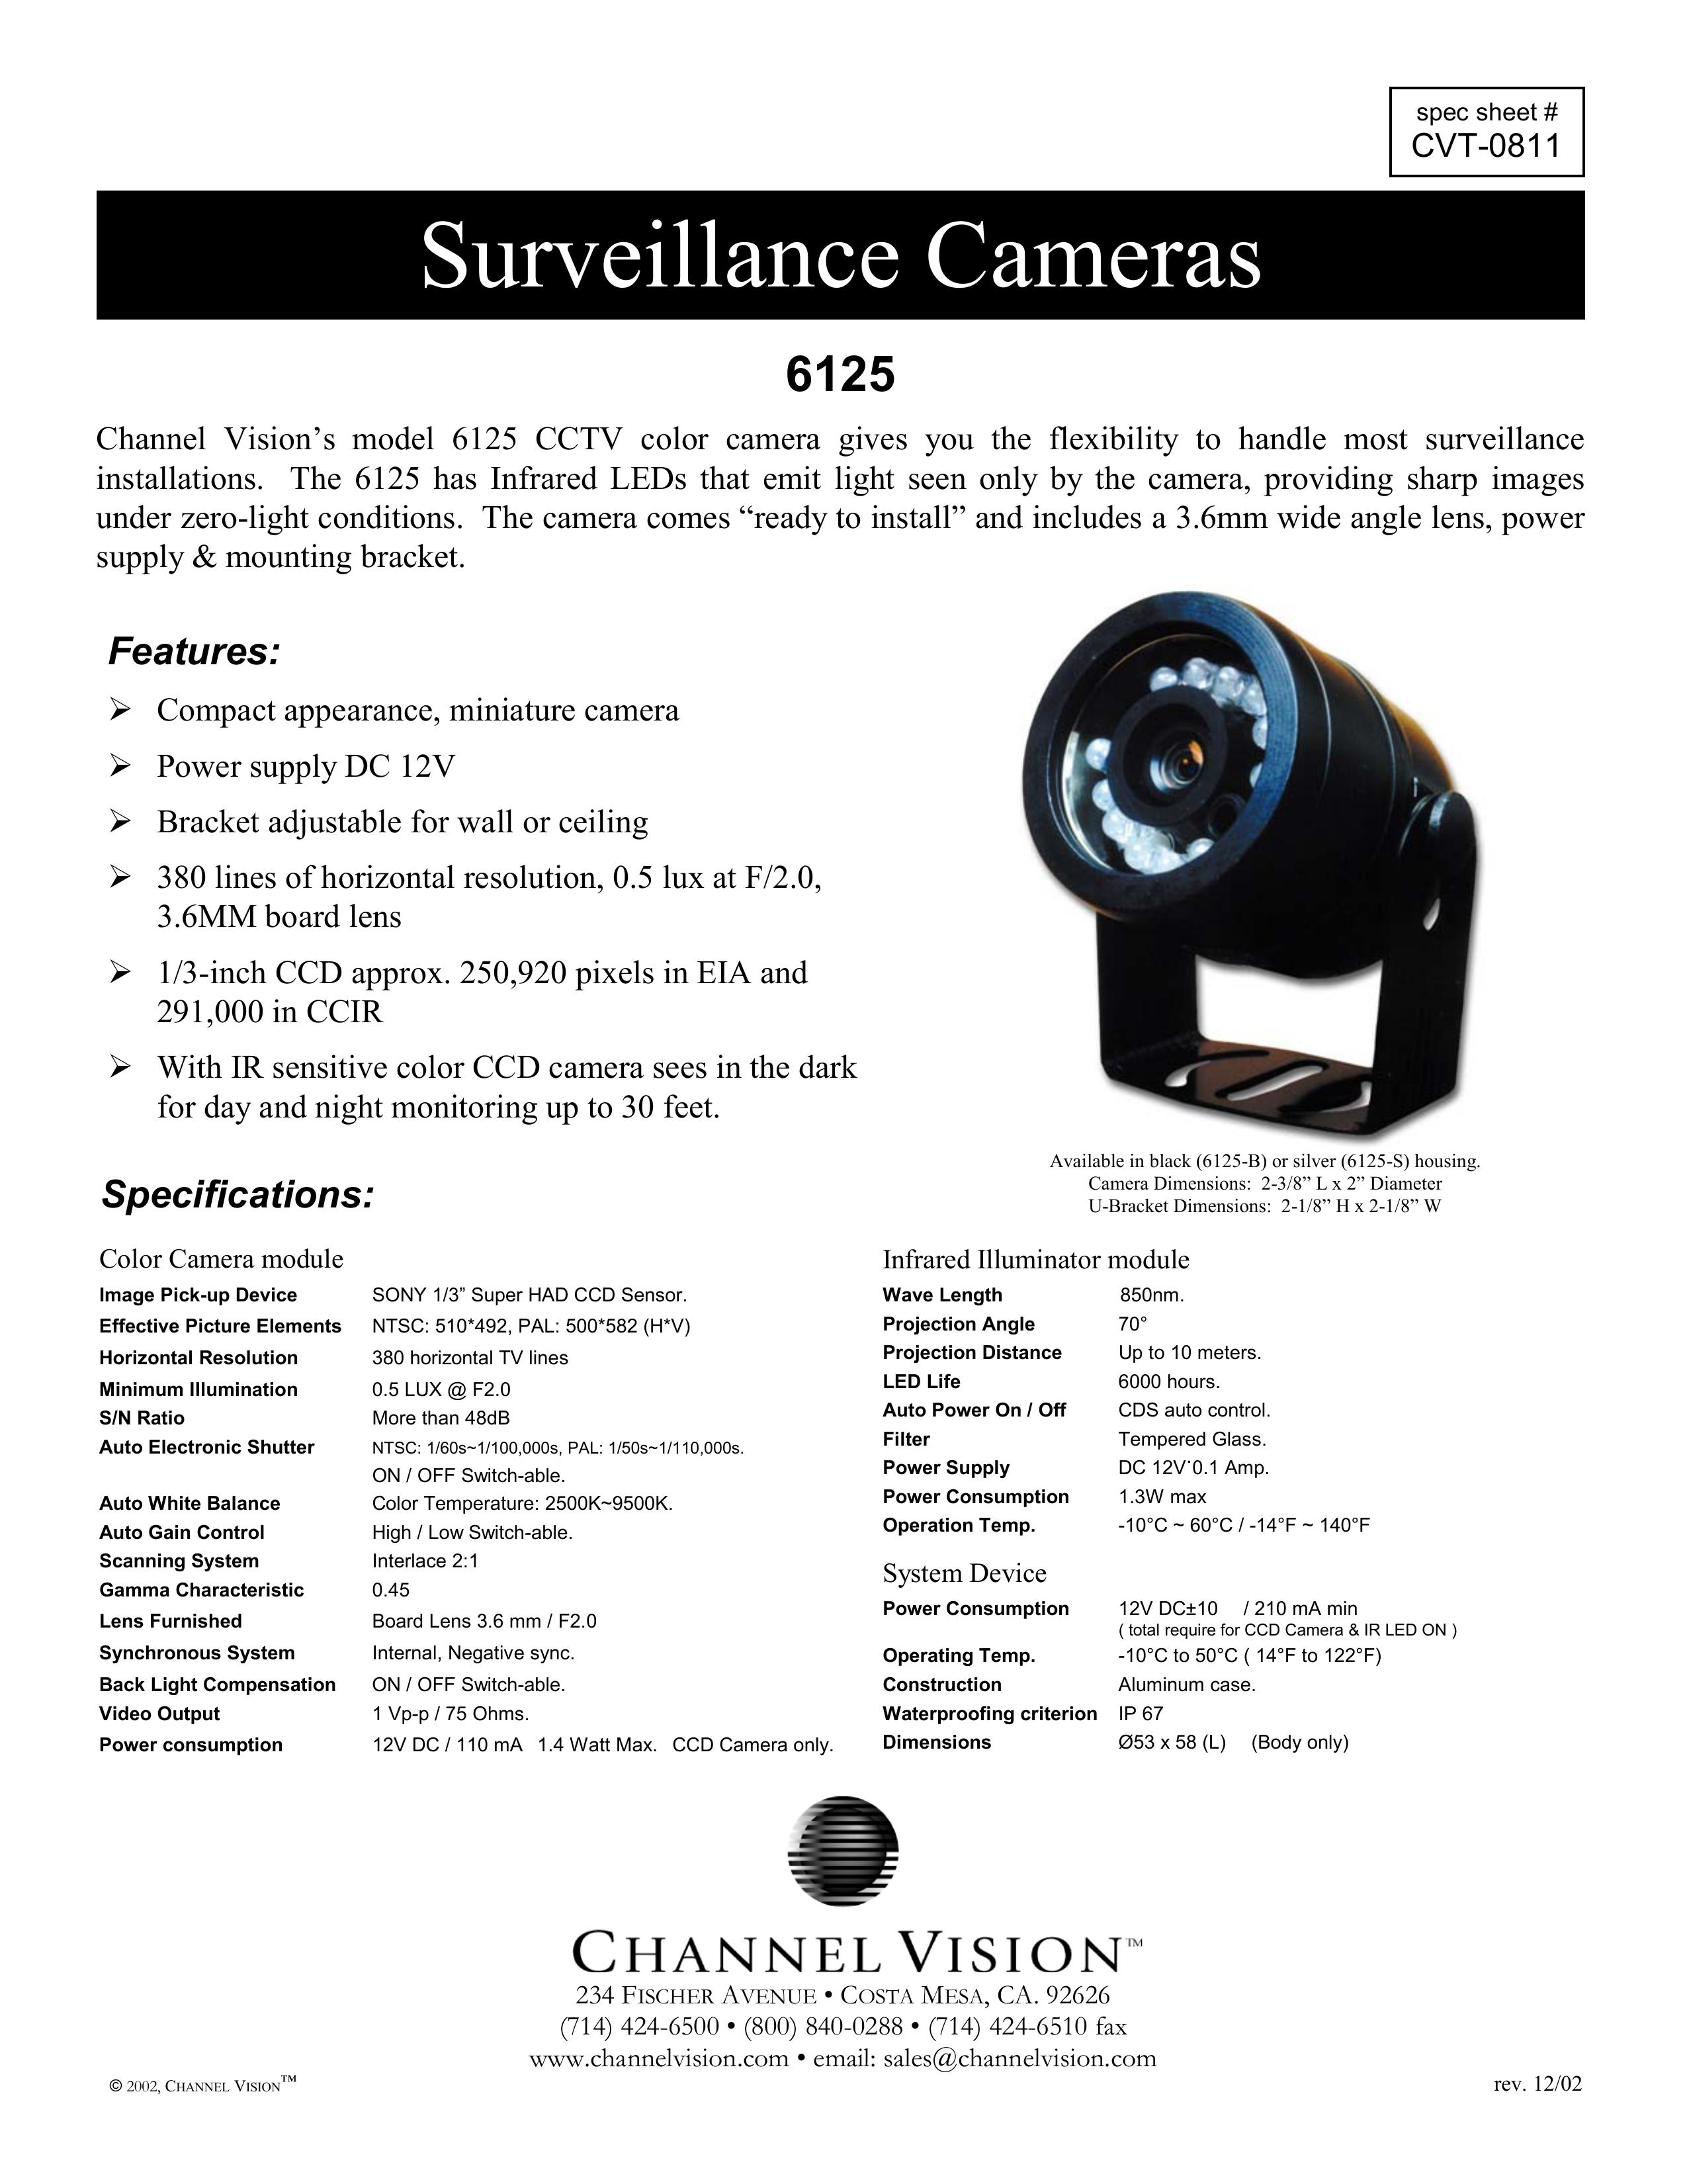 Channel Vision 6125 Security Camera User Manual